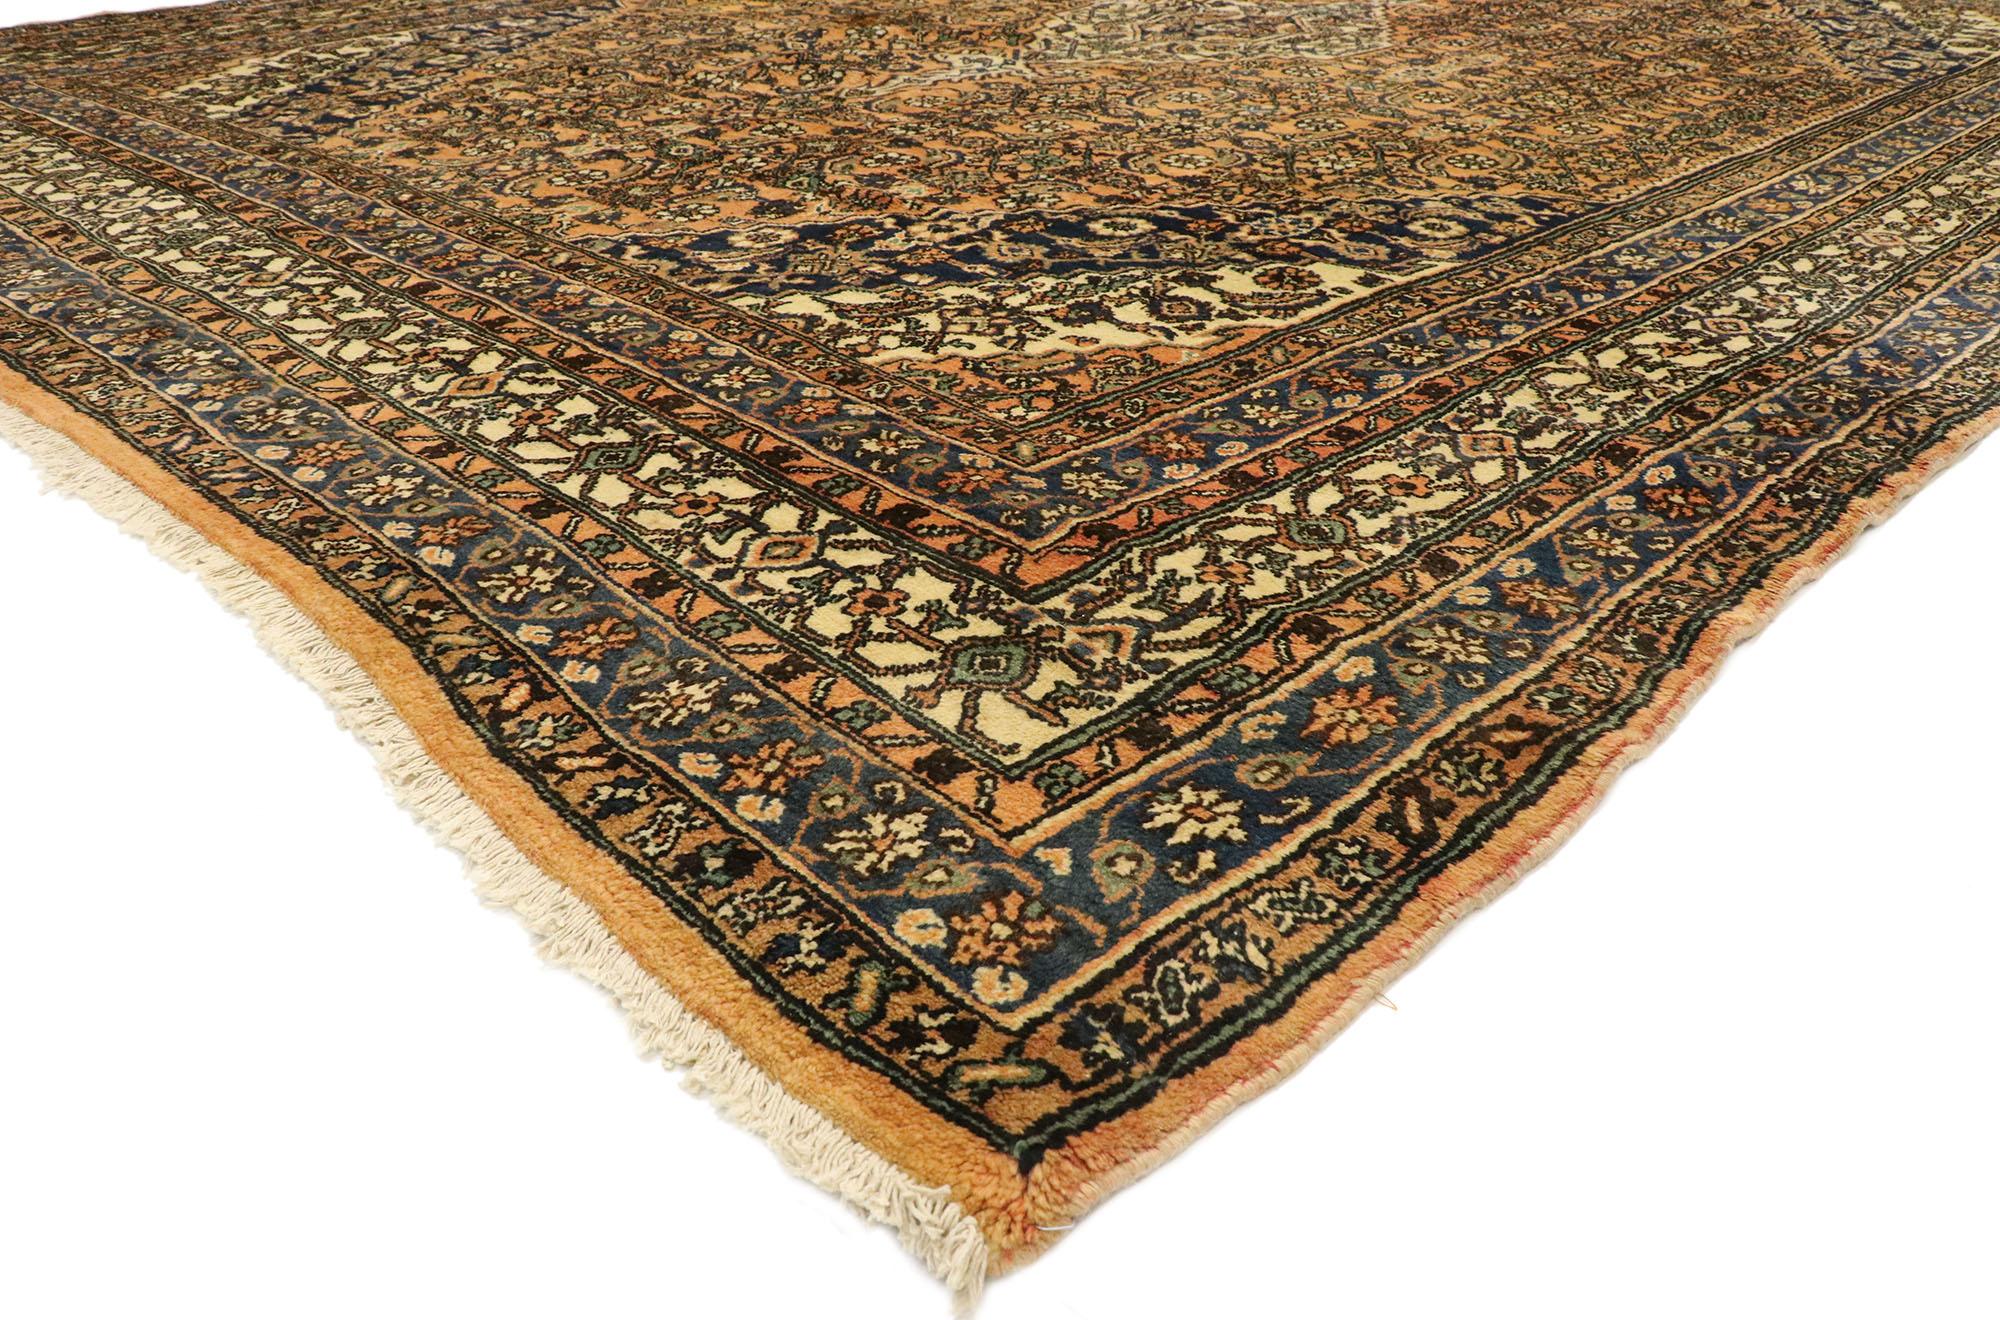 75601, vintage Persian Hamadan area rug with Mediterranean Rustic Tuscan style. Effortless beauty and soft, bespoke vibes meet rustic sensibility with a Mediterranean Villa Tuscan style in this hand knotted wool vintage Persian Hamadan rug. The